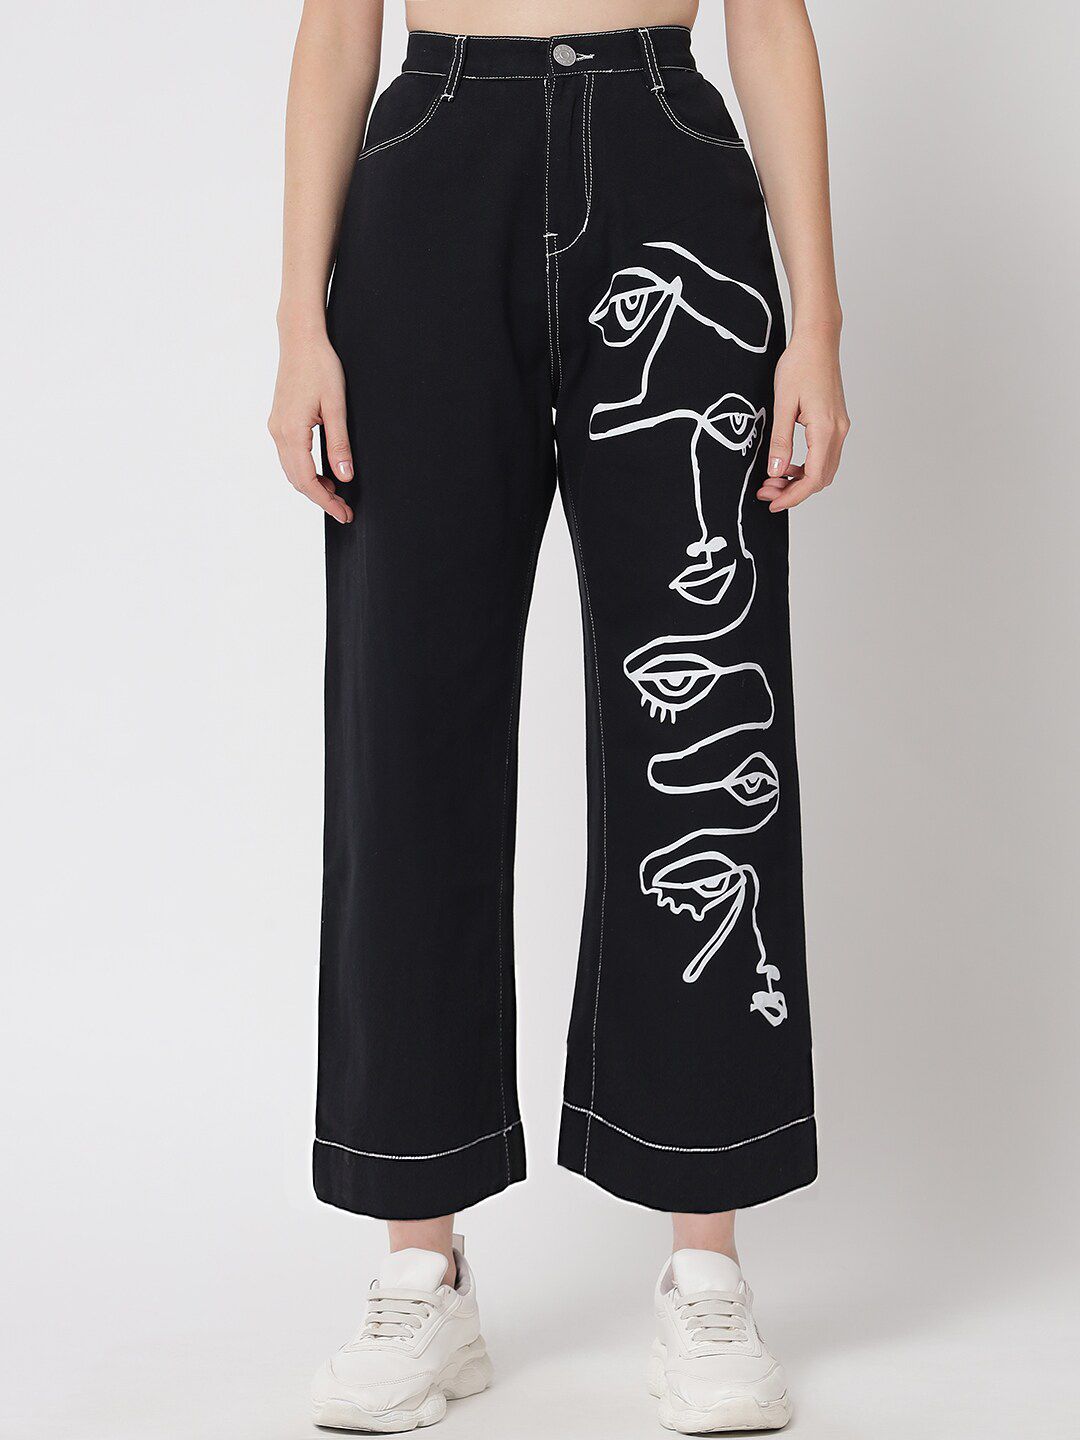 River Of Design Jeans Women Black Wide Leg High-Rise Printed Cotton Jeans Price in India